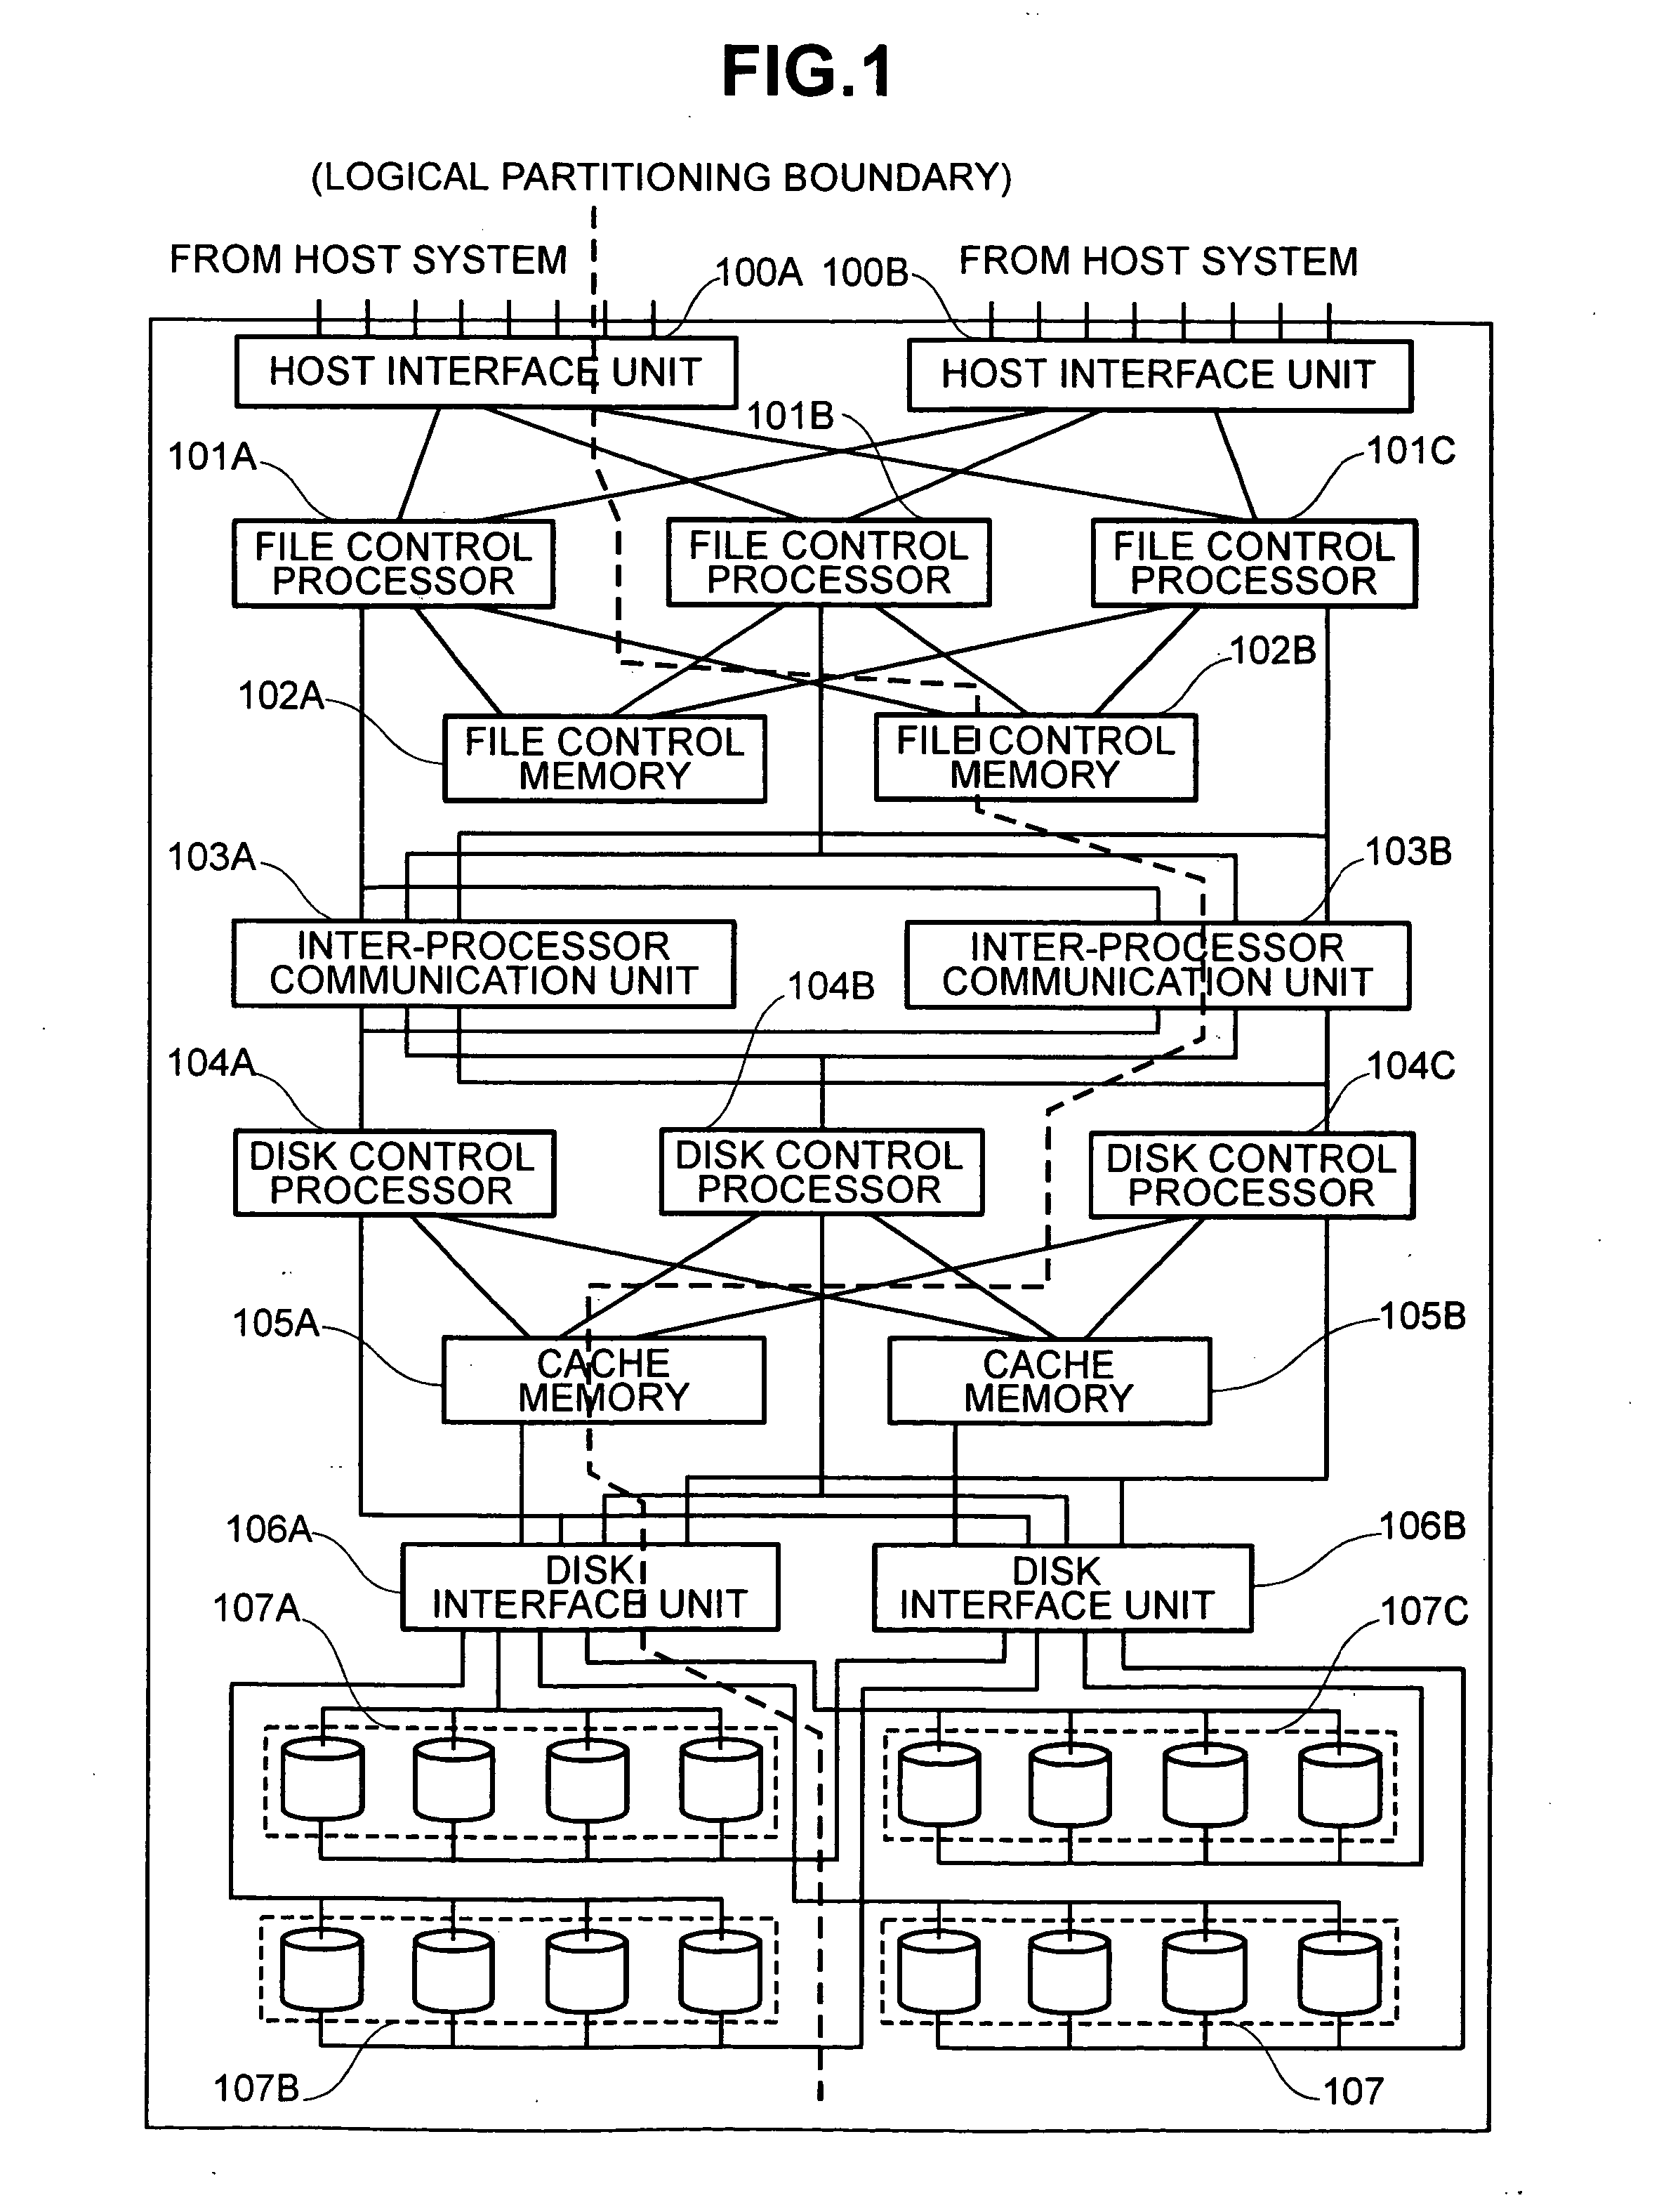 Storage having logical partitioning capability and systems which include the storage